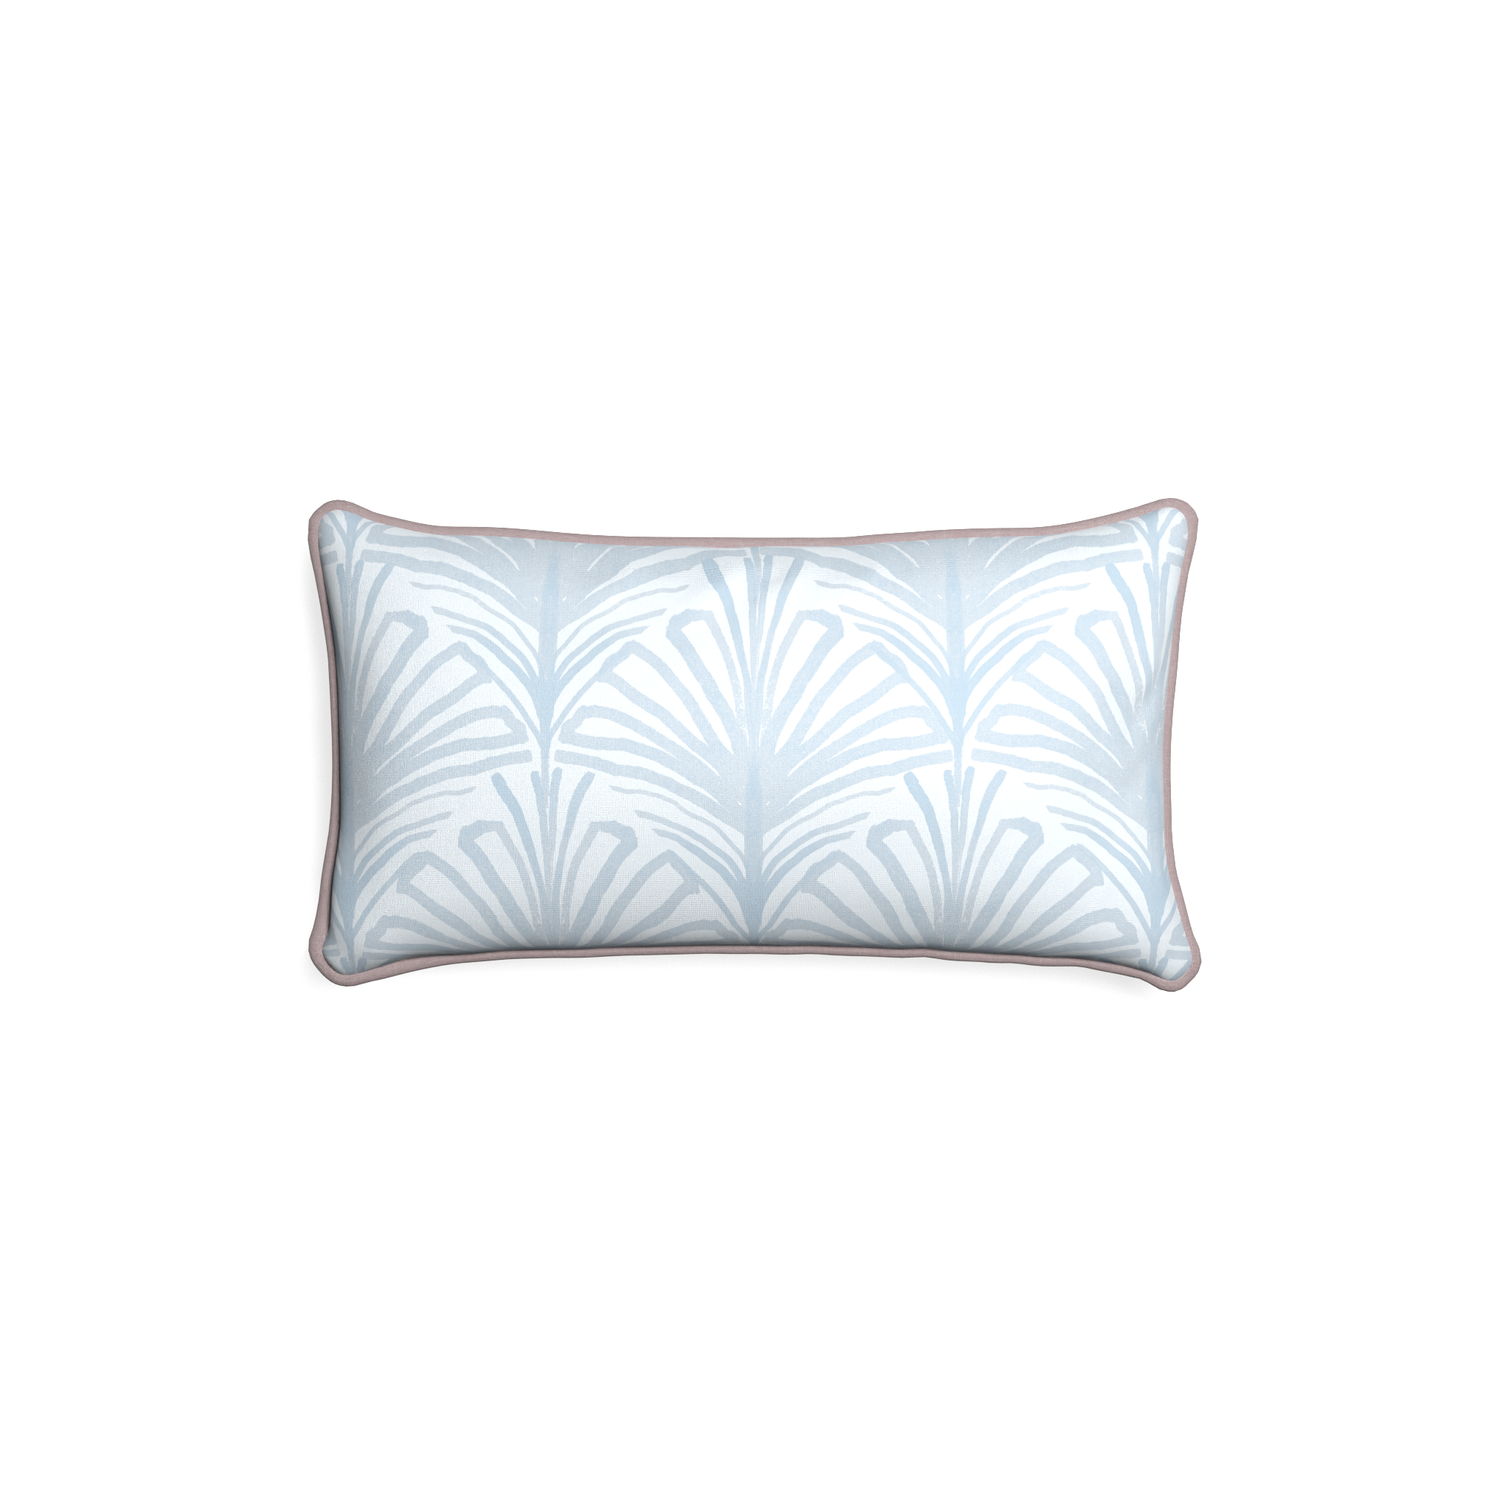 Petite-lumbar suzy sky custom sky blue palmpillow with orchid piping on white background